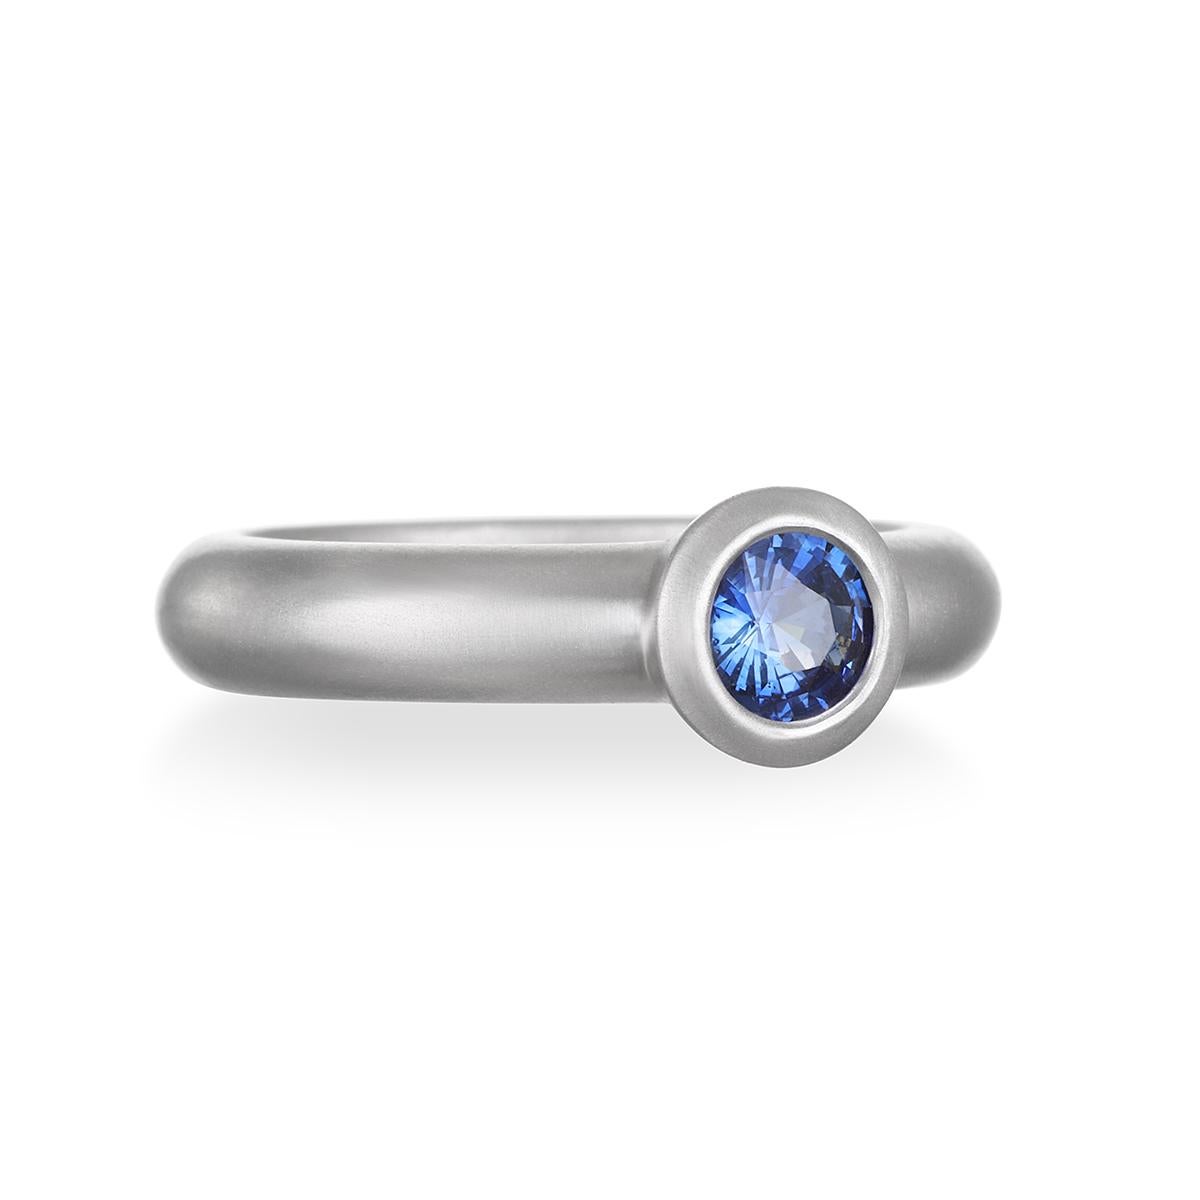 A beautiful, vivid shade of blue, this Ceylon Blue Sapphire round bezel ring is bezel set in platinum with a matte finish for a clean, timeless look. It can be worn alone as a statement piece or stacked with other rings. 

Sapphire: .62 Carats
Bezel